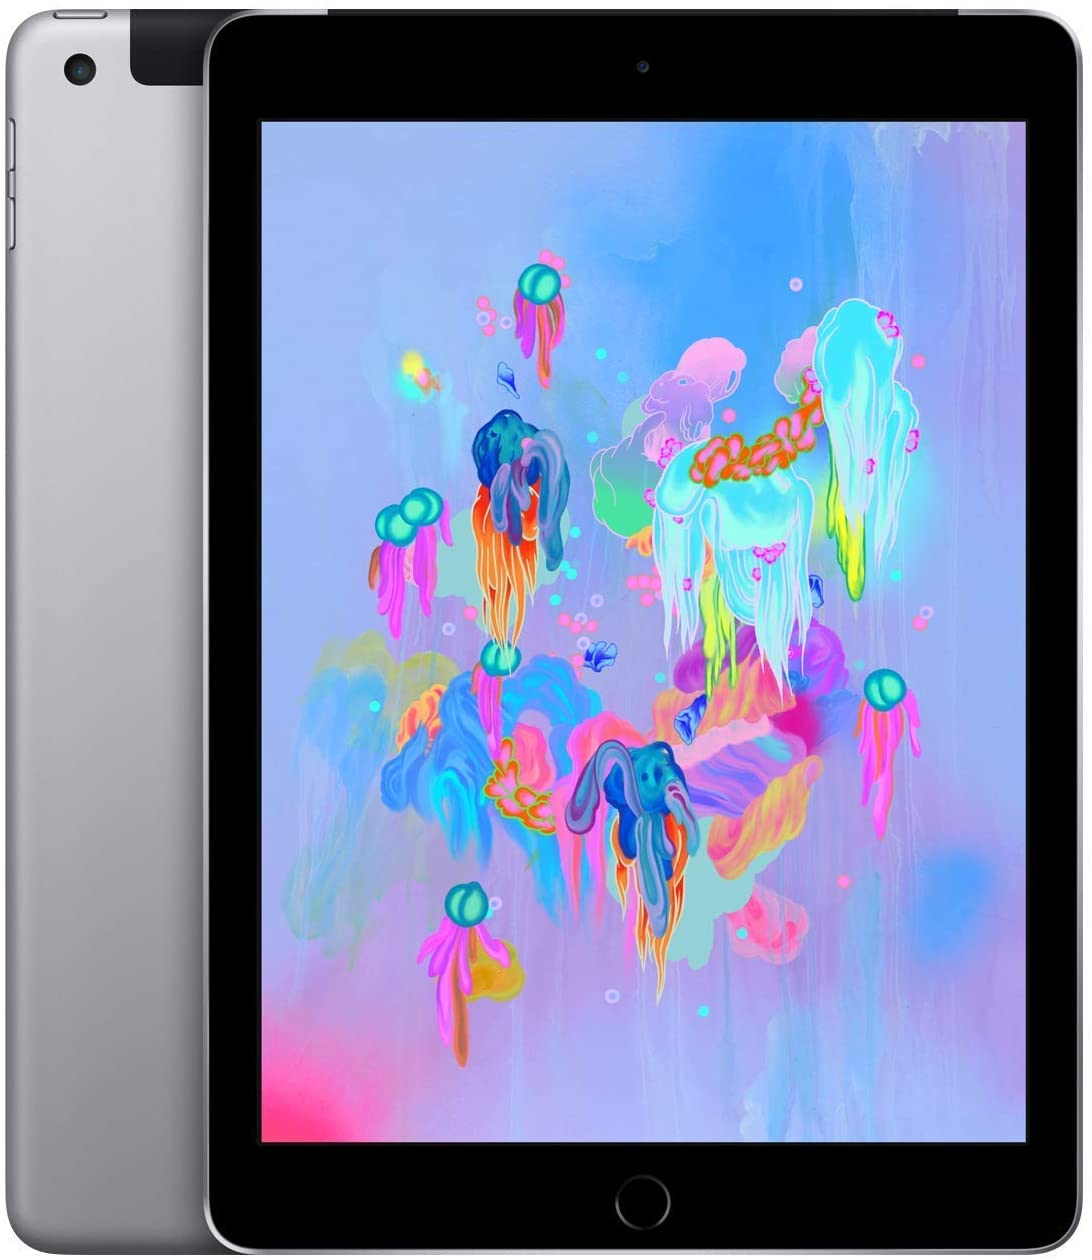 Apple iPad 6 32GB Wi-Fi + Cellular 3G/4G Space Gray New Battery, Glass Screen Protector & Shipping (As New)